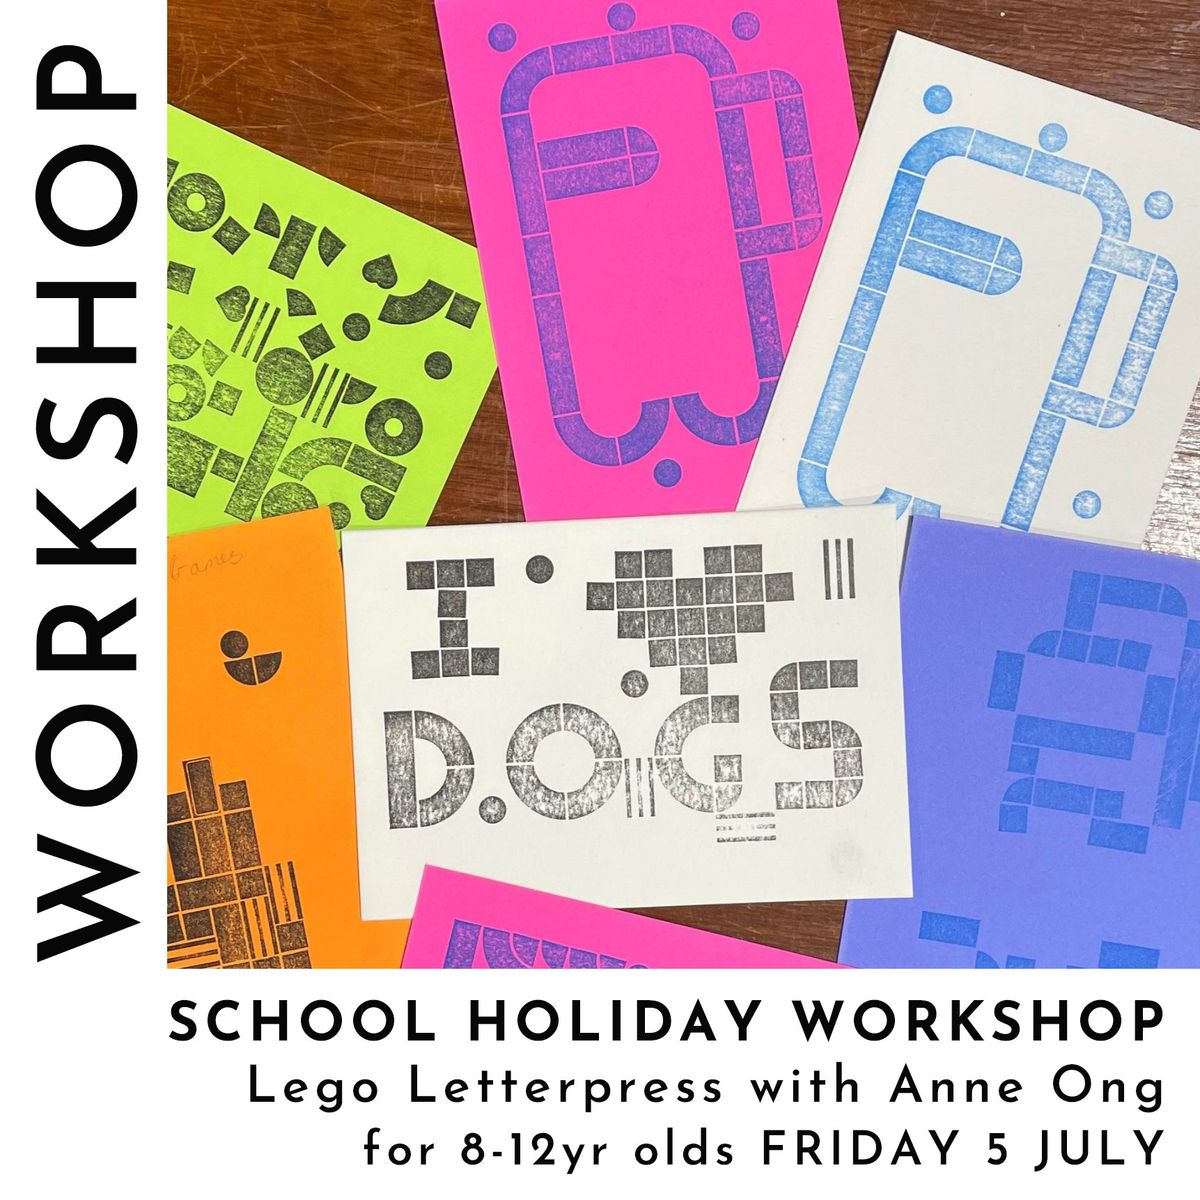 SCHOOL HOLIDAY WORKSHOP - Lego Letterpress with Anne Ong